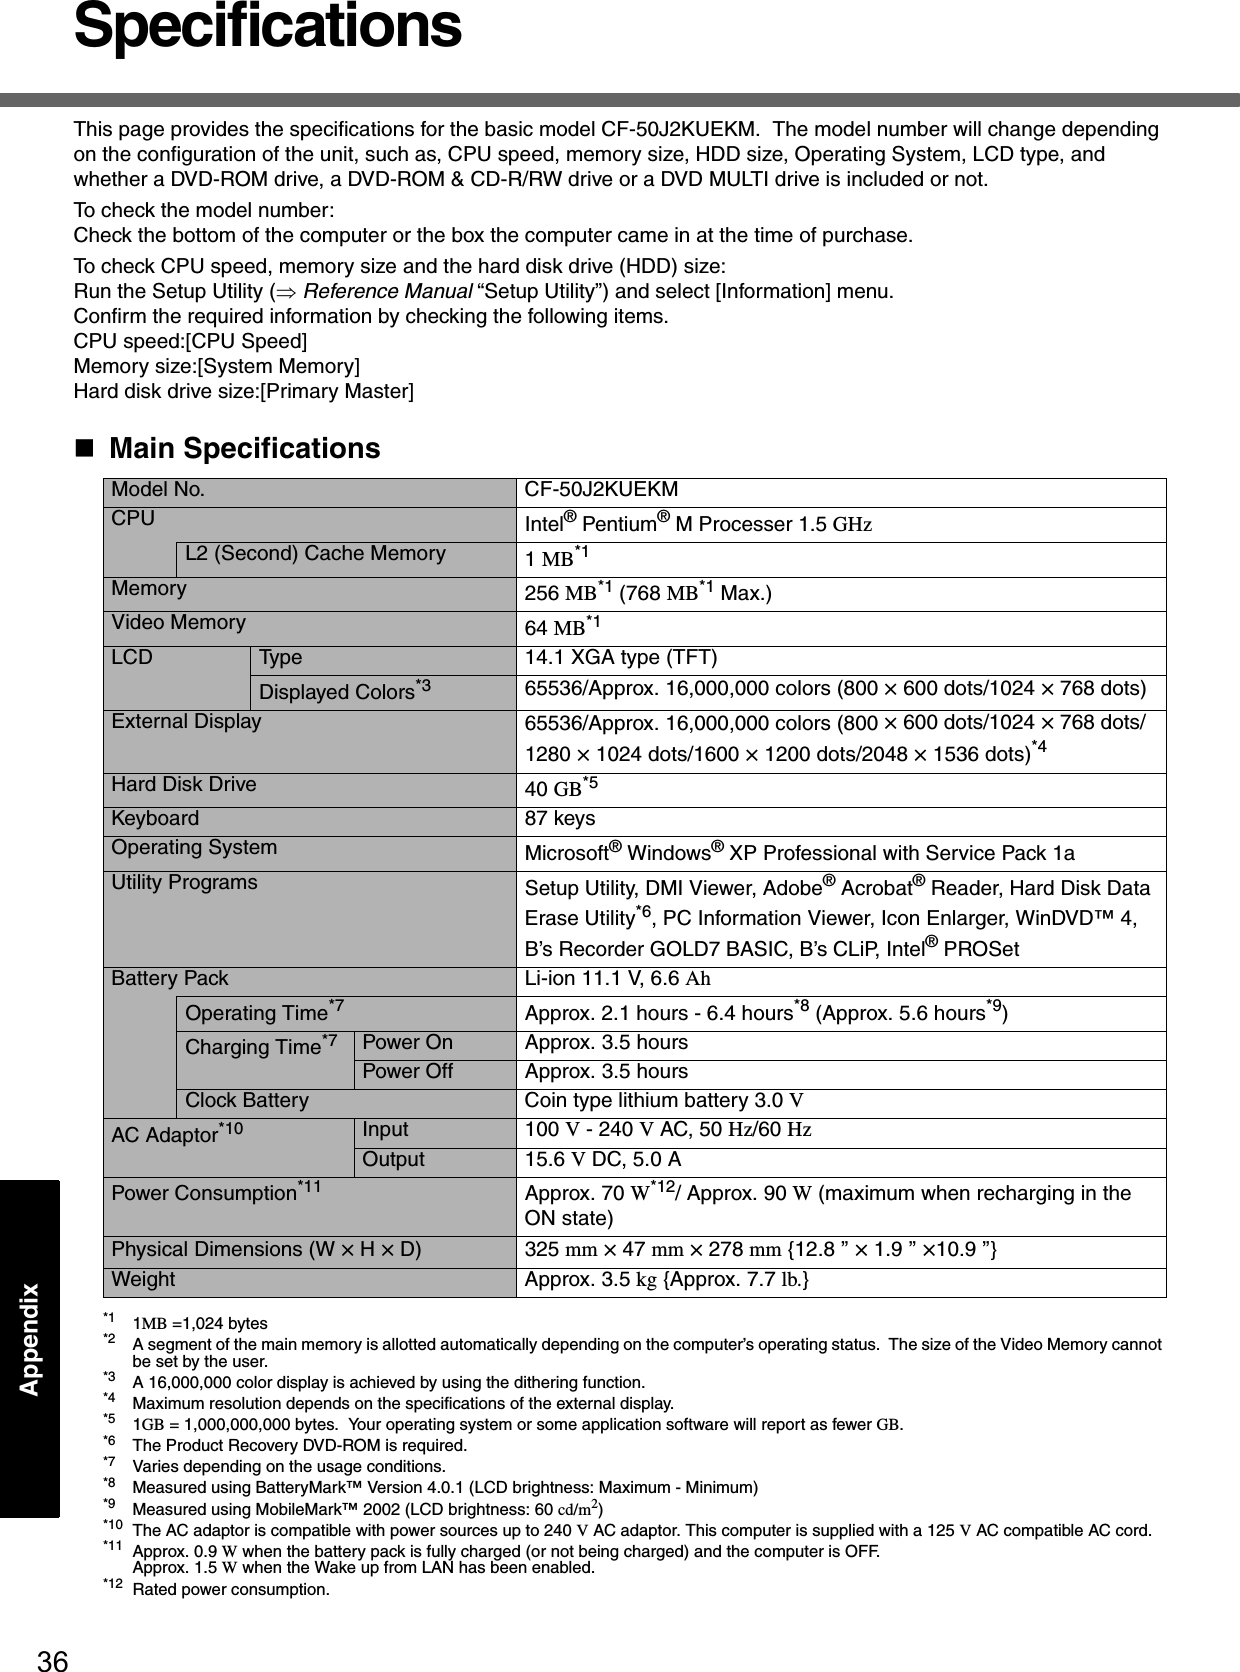 36AppendixSpecificationsThis page provides the specifications for the basic model CF-50J2KUEKM.  The model number will change depending on the configuration of the unit, such as, CPU speed, memory size, HDD size, Operating System, LCD type, and whether a DVD-ROM drive, a DVD-ROM &amp; CD-R/RW drive or a DVD MULTI drive is included or not.To check the model number:Check the bottom of the computer or the box the computer came in at the time of purchase.To check CPU speed, memory size and the hard disk drive (HDD) size:Run the Setup Utility (⇒ Reference Manual “Setup Utility”) and select [Information] menu.Confirm the required information by checking the following items.CPU speed:[CPU Speed]Memory size:[System Memory]Hard disk drive size:[Primary Master]Main Specifications*1 1MB =1,024 bytes*2 A segment of the main memory is allotted automatically depending on the computer’s operating status.  The size of the Video Memory cannot be set by the user.*3 A 16,000,000 color display is achieved by using the dithering function.*4 Maximum resolution depends on the specifications of the external display.*5 1GB = 1,000,000,000 bytes.  Your operating system or some application software will report as fewer GB.*6 The Product Recovery DVD-ROM is required.*7 Varies depending on the usage conditions.*8 Measured using BatteryMark™ Version 4.0.1 (LCD brightness: Maximum - Minimum)*9 Measured using MobileMark™ 2002 (LCD brightness: 60 cd/m2)*10 The AC adaptor is compatible with power sources up to 240 V AC adaptor. This computer is supplied with a 125 V AC compatible AC cord.*11 Approx. 0.9 W when the battery pack is fully charged (or not being charged) and the computer is OFF. Approx. 1.5 W when the Wake up from LAN has been enabled.*12 Rated power consumption.Model No. CF-50J2KUEKMCPU Intel® Pentium® M Processer 1.5 GHzL2 (Second) Cache Memory 1 MB*1Memory 256 MB*1 (768 MB*1 Max.)Video Memory 64 MB*1LCD Type 14.1 XGA type (TFT)Displayed Colors*3 65536/Approx. 16,000,000 colors (800 × 600 dots/1024 × 768 dots)External Display 65536/Approx. 16,000,000 colors (800 × 600 dots/1024 × 768 dots/1280 × 1024 dots/1600 × 1200 dots/2048 × 1536 dots)*4Hard Disk Drive 40 GB*5Keyboard 87 keysOperating System Microsoft® Windows® XP Professional with Service Pack 1aUtility Programs Setup Utility, DMI Viewer, Adobe® Acrobat® Reader, Hard Disk Data Erase Utility*6, PC Information Viewer, Icon Enlarger, WinDVD™ 4, B’s Recorder GOLD7 BASIC, B’s CLiP, Intel® PROSetBattery Pack Li-ion 11.1 V, 6.6 AhOperating Time*7 Approx. 2.1 hours - 6.4 hours*8 (Approx. 5.6 hours*9)Charging Time*7 Power On Approx. 3.5 hoursPower Off Approx. 3.5 hoursClock Battery Coin type lithium battery 3.0 VAC Adaptor*10 Input 100 V - 240 V AC, 50 Hz/60 HzOutput 15.6 V DC, 5.0 APower Consumption*11 Approx. 70 W*12/ Approx. 90 W (maximum when recharging in the ON state)Physical Dimensions (W × H × D) 325 mm × 47 mm × 278 mm {12.8 ’’ × 1.9 ’’ ×10.9 ’’}Weight Approx. 3.5 kg {Approx. 7.7 lb.}